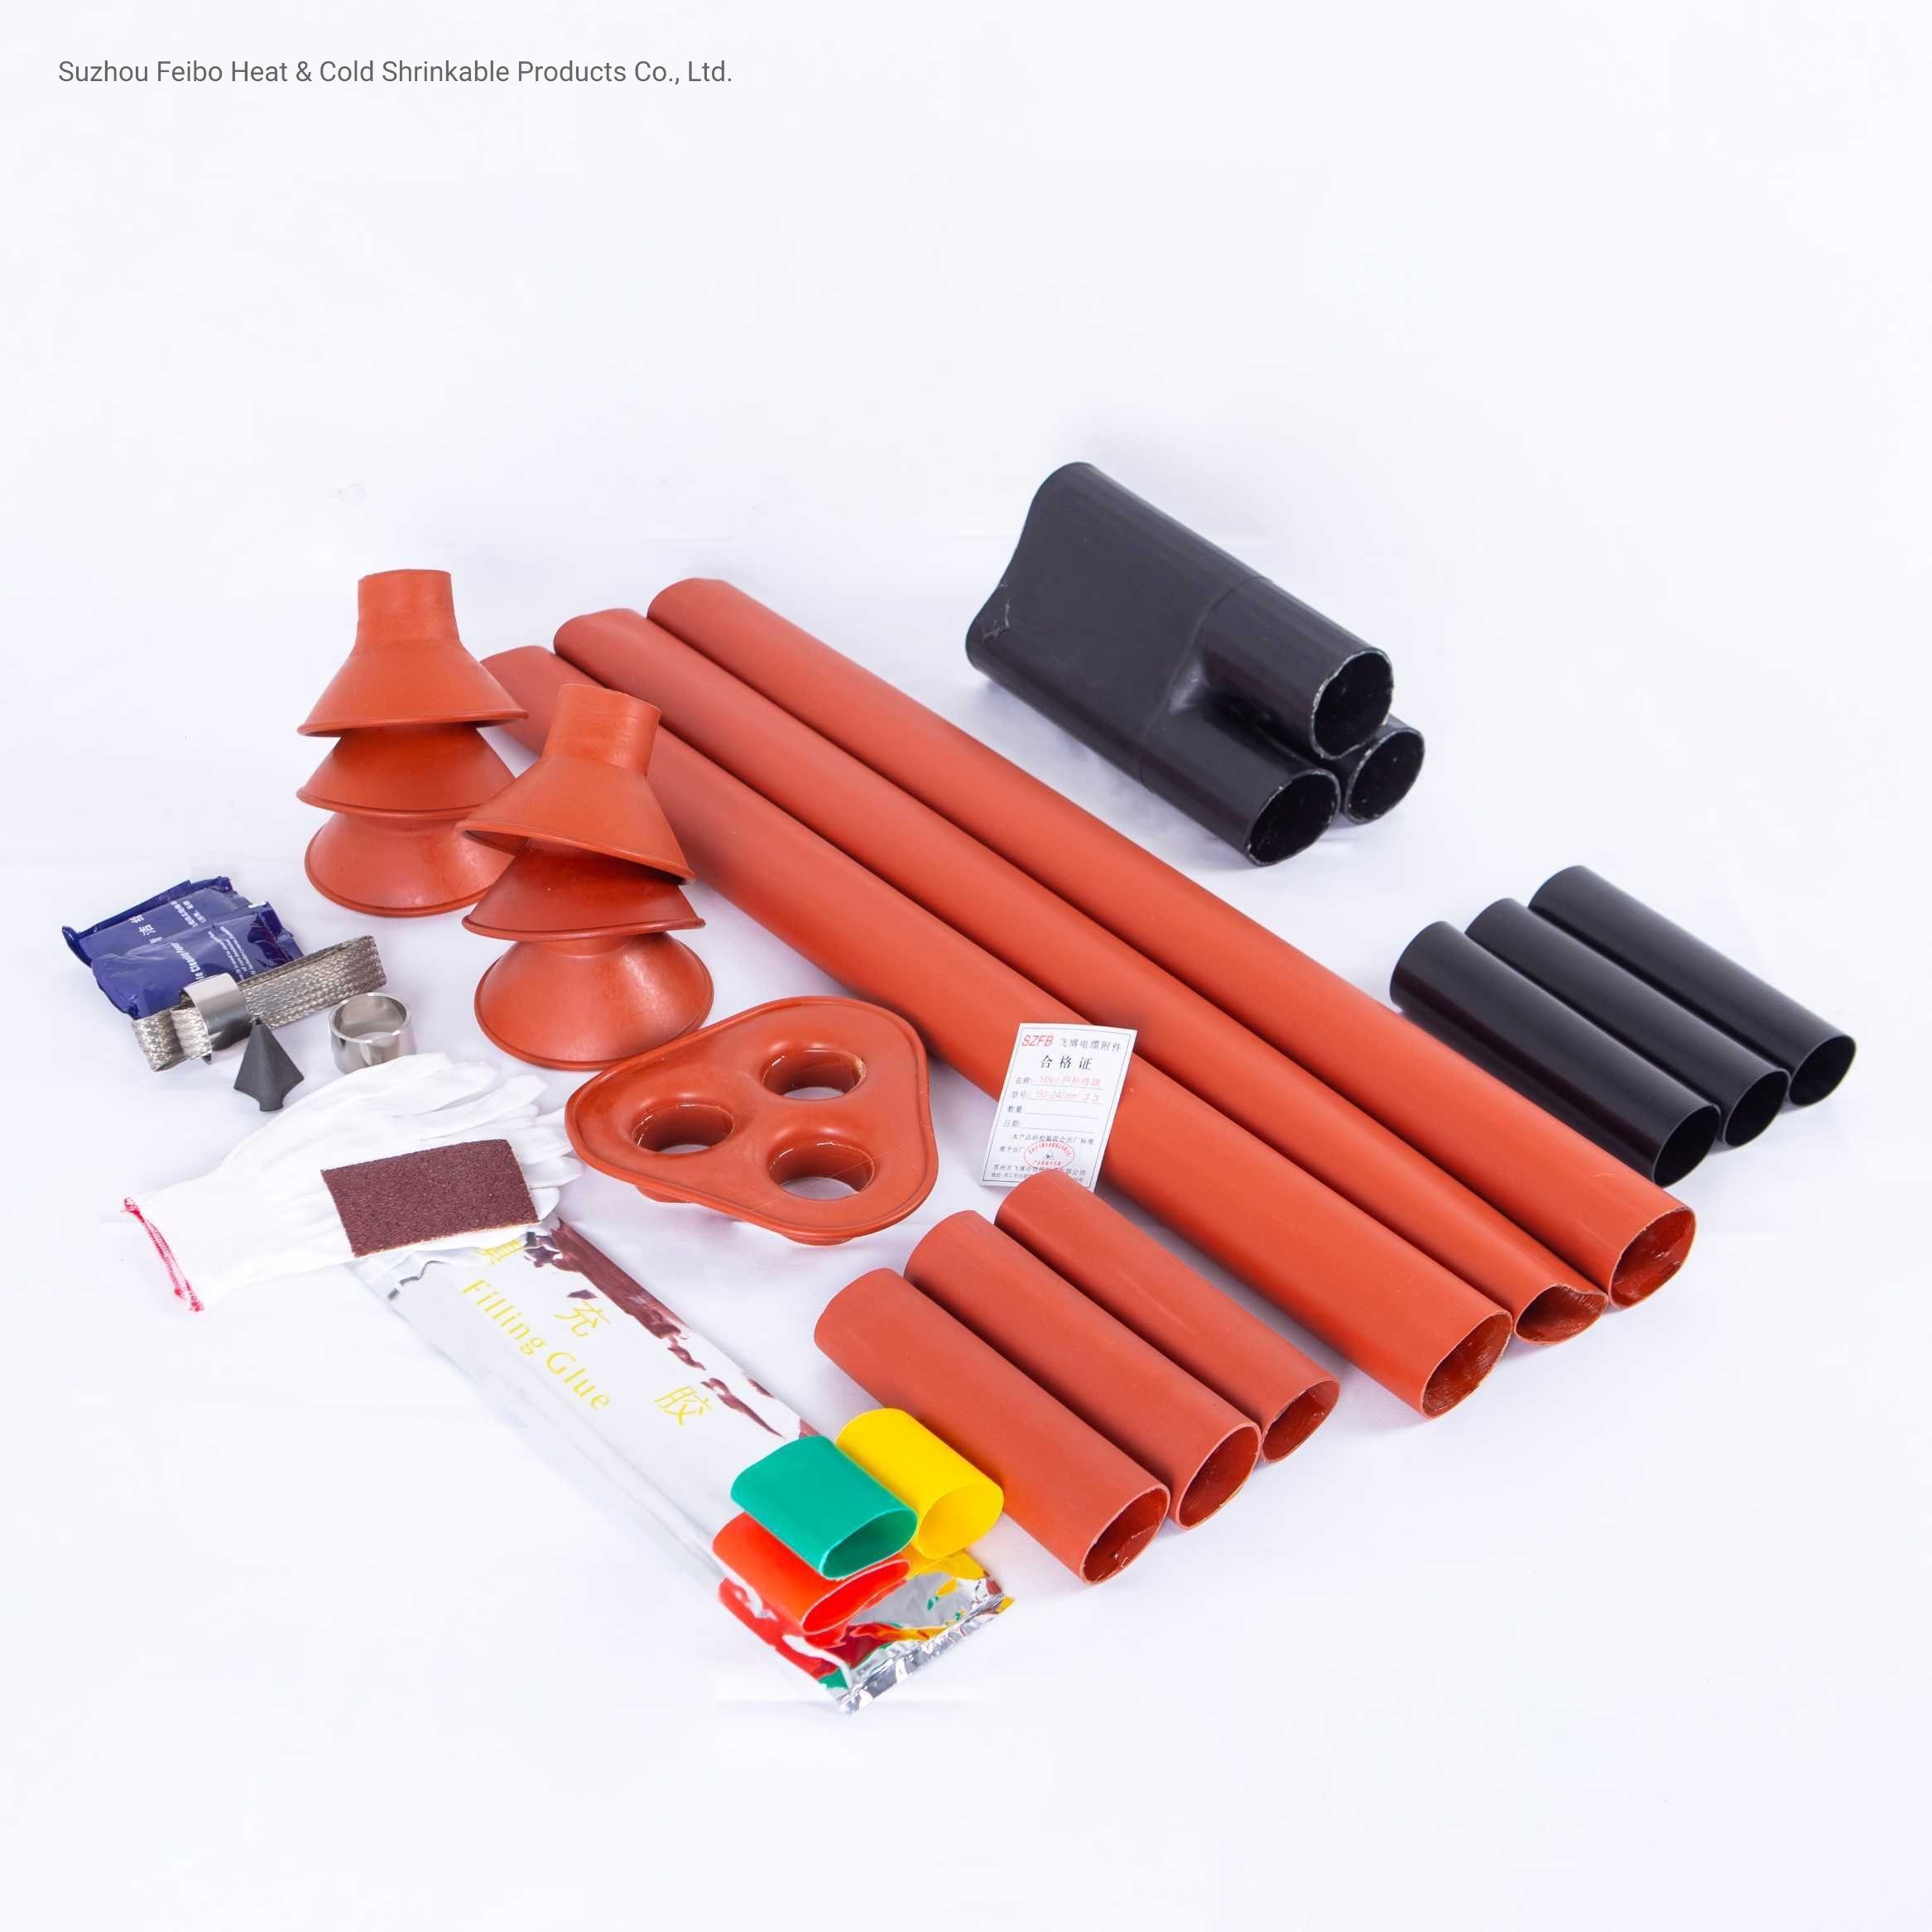 High Voltage Heat Shrink Outdoor Terminal Assembly Cable Accessories Cable End Protection 33kv Heat Shrink Terminal Kit